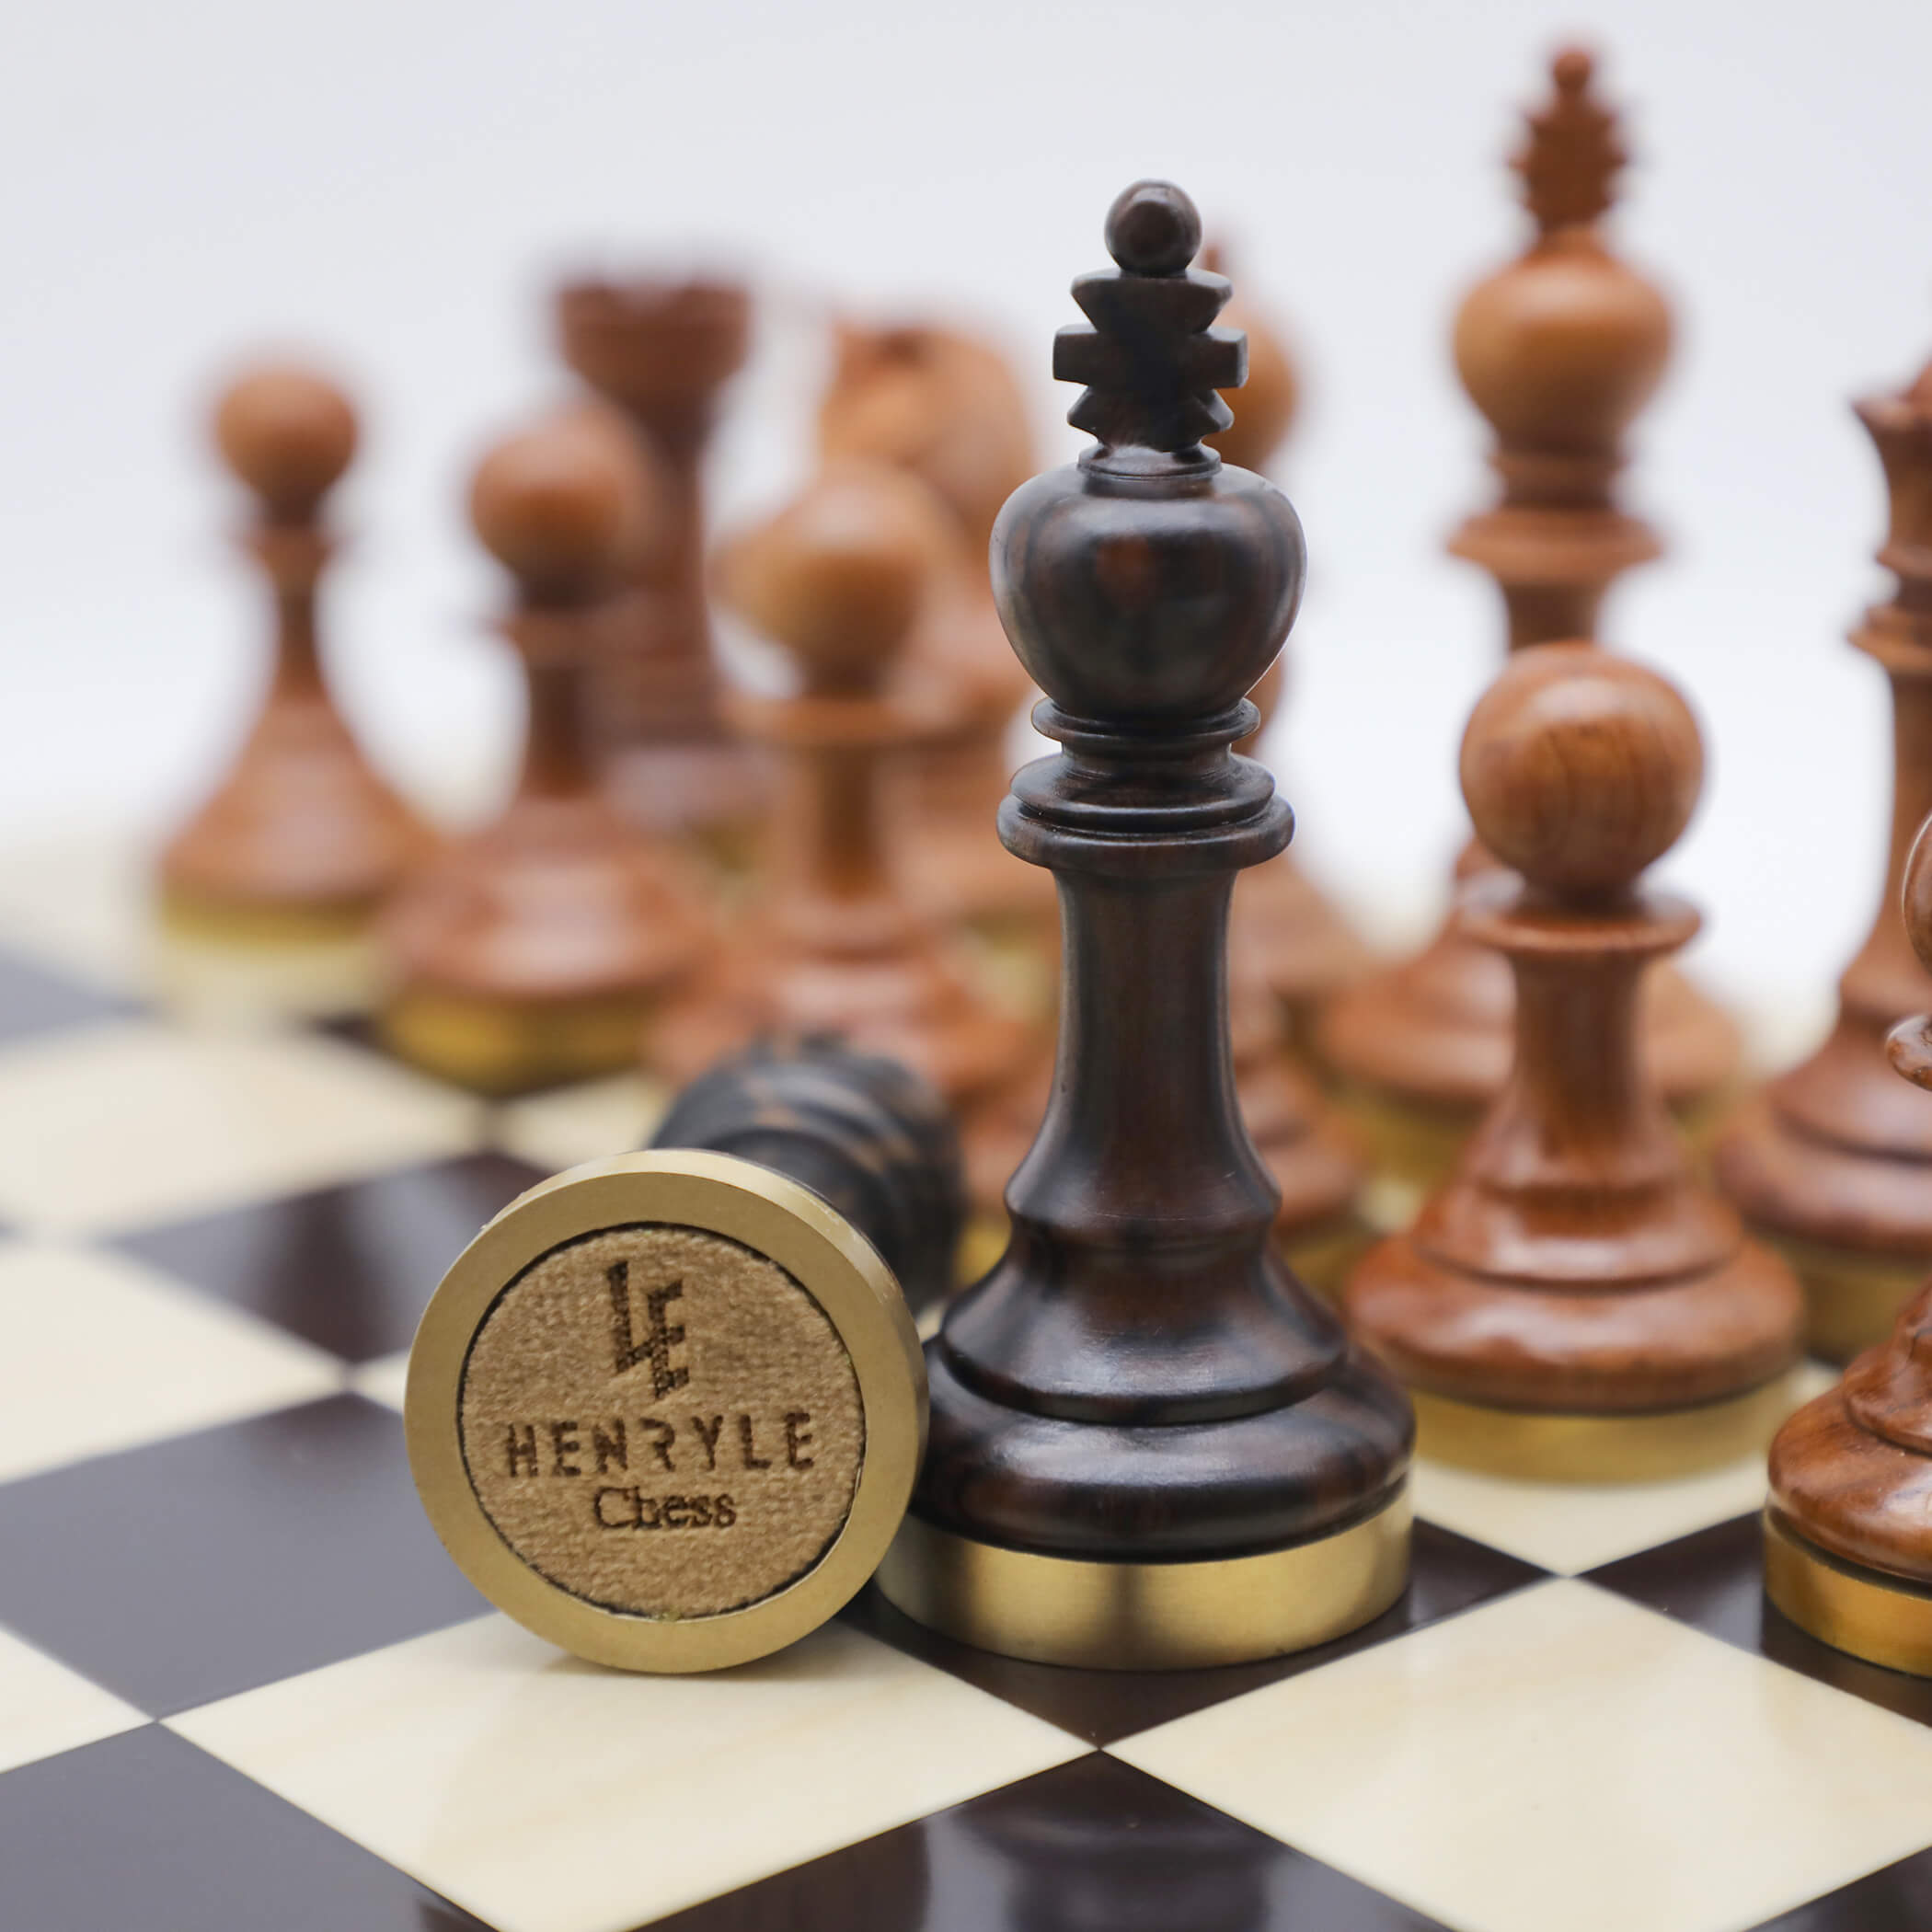 Luxury Wooden Chess Pieces - Henry Le Chess Sets